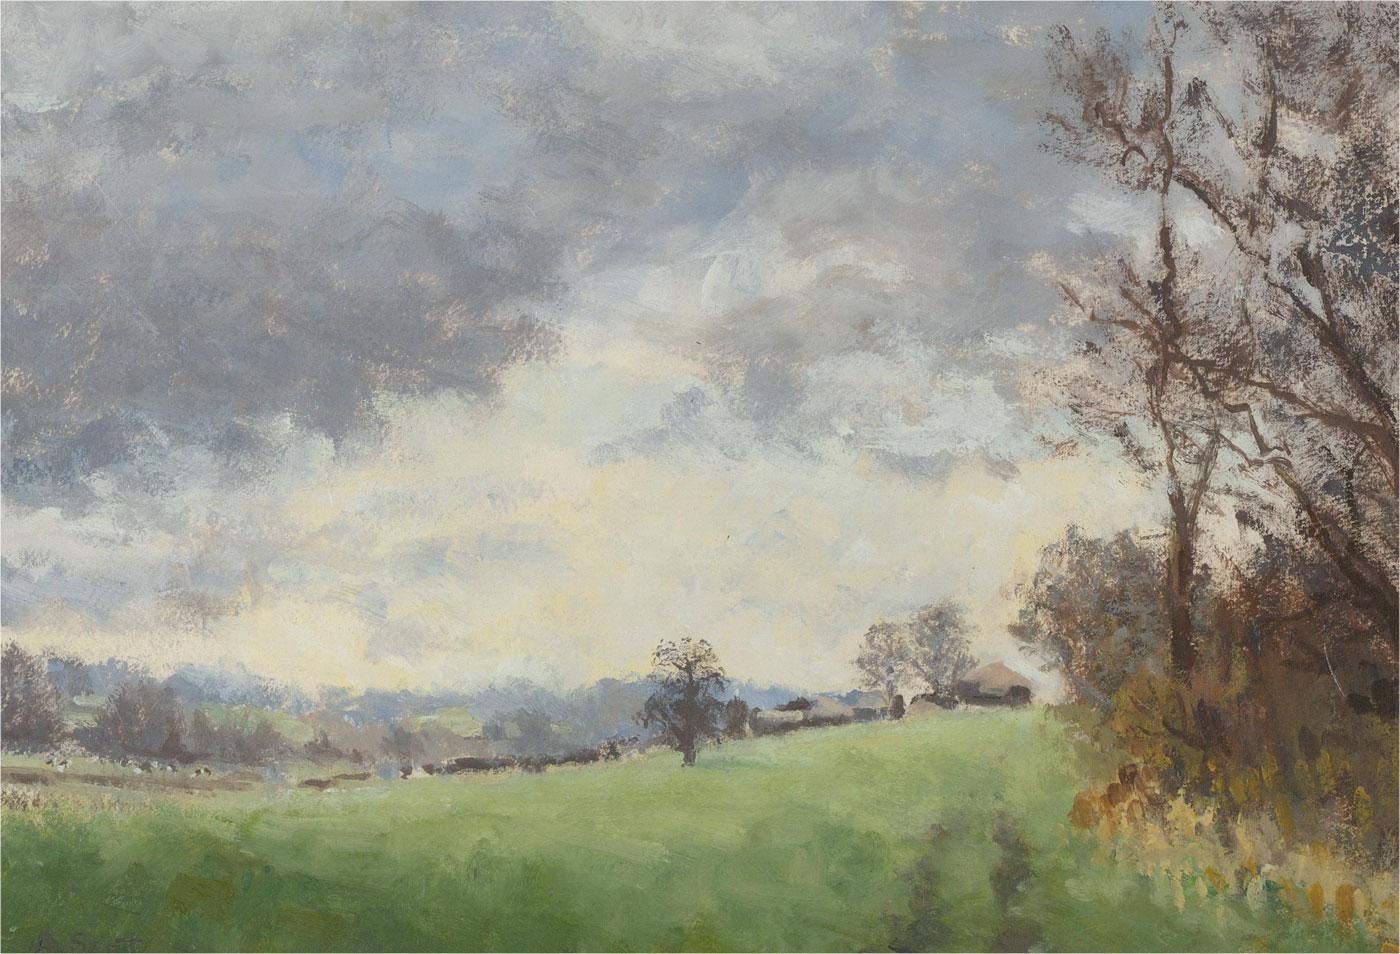 An attractive oil painting by Anne Scott, depicting a rural scene in Devizes, Wiltshire. Signed to the lower left-hand corner. There is a label on the reverse inscribed with the artist's name and location. Presented in a double card mount and in a